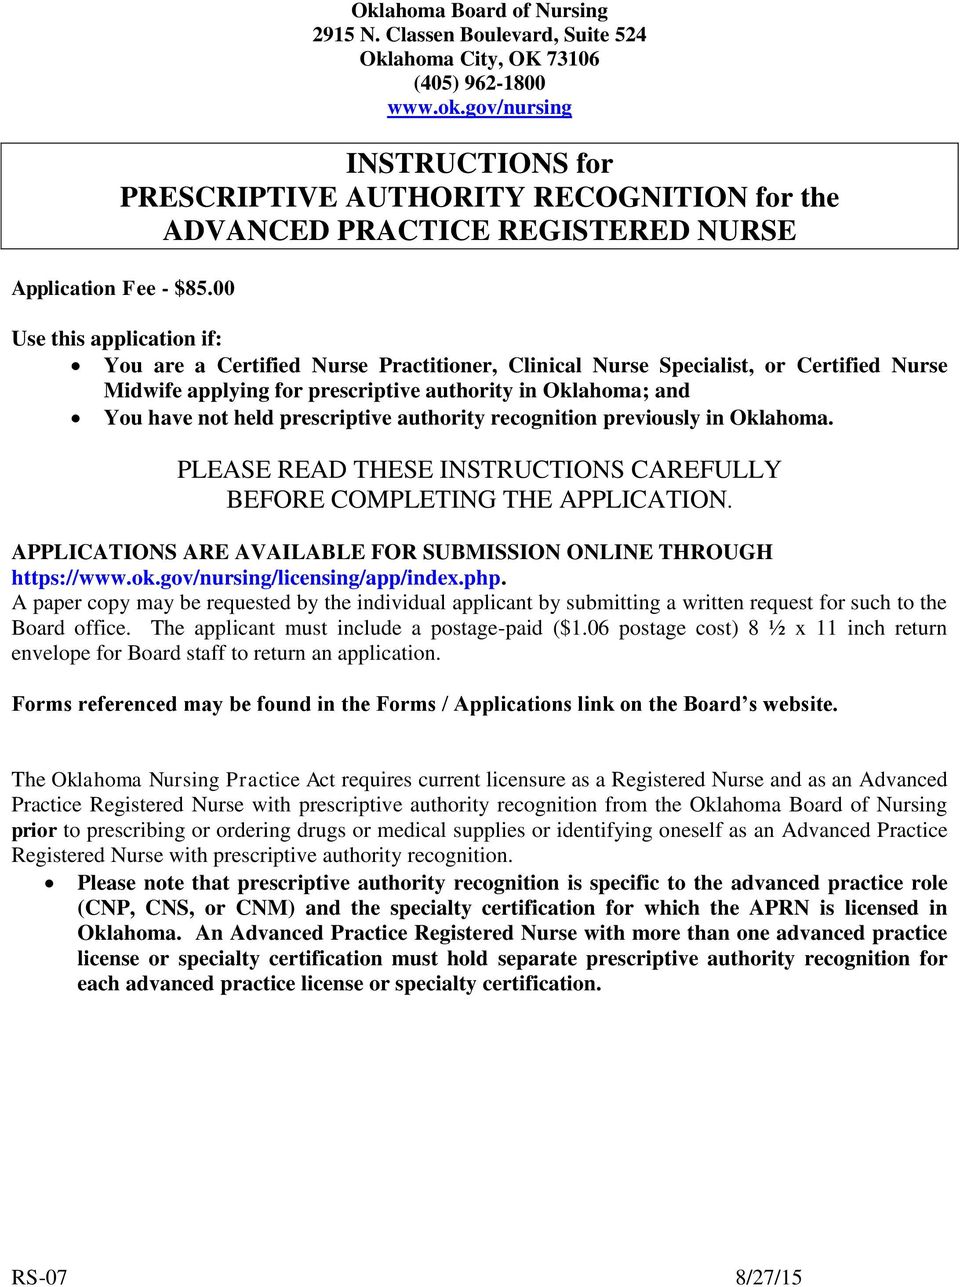 00 Use this application if: You are a Certified Nurse Practitioner, Clinical Nurse Specialist, or Certified Nurse Midwife applying for prescriptive authority in Oklahoma; and You have not held